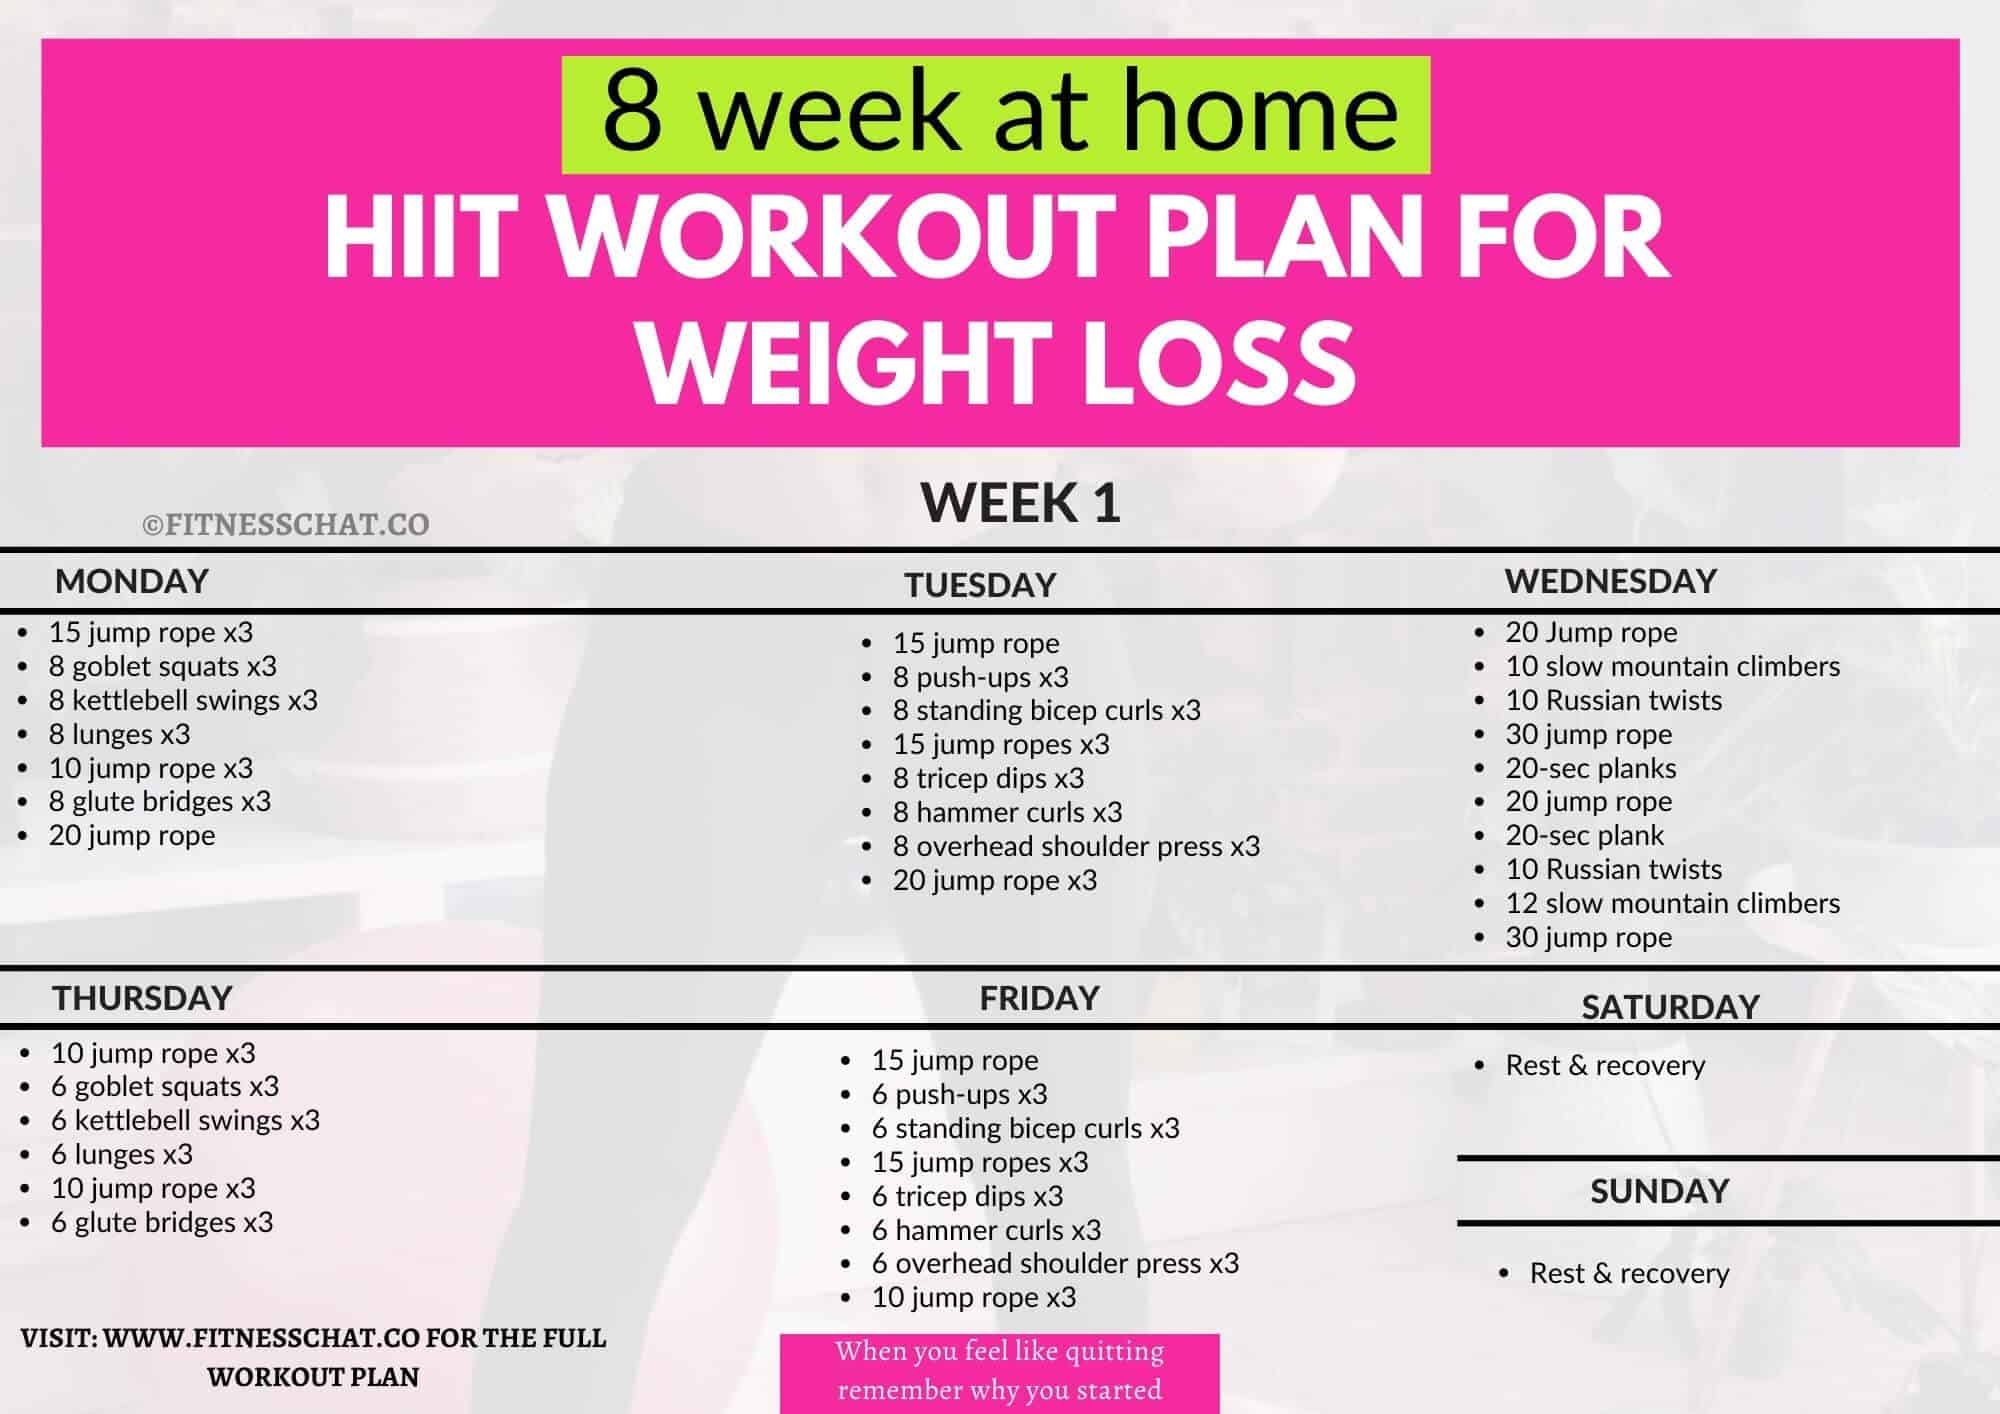 HIIT and strength training weekly schedule 